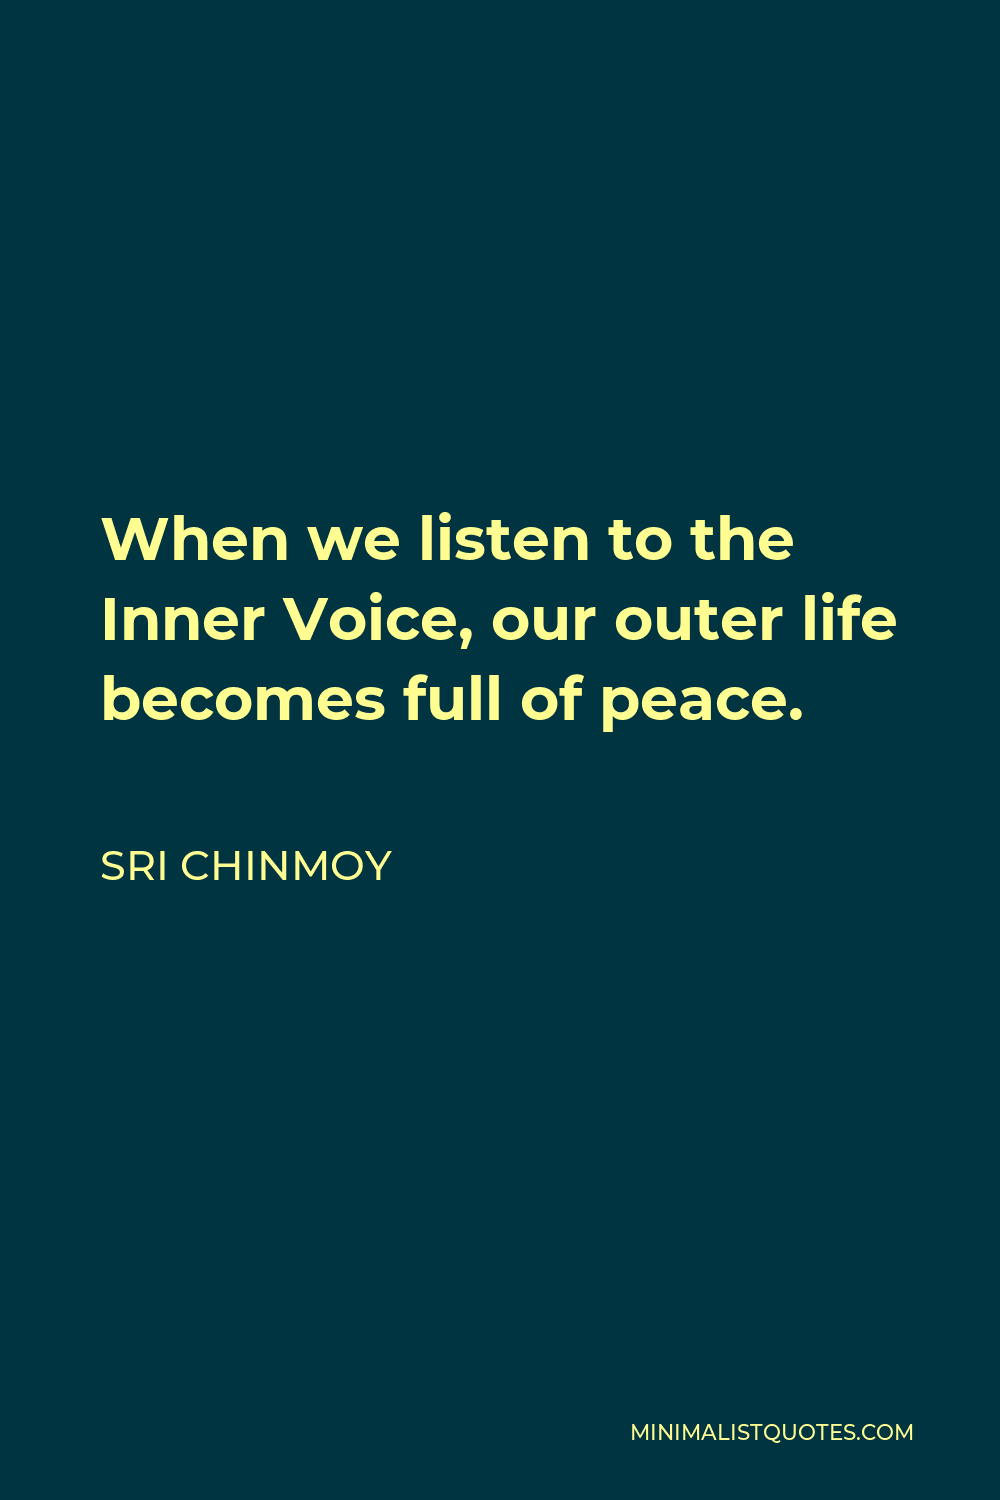 Sri Chinmoy Quote - When we listen to the Inner Voice, our outer life becomes full of peace.